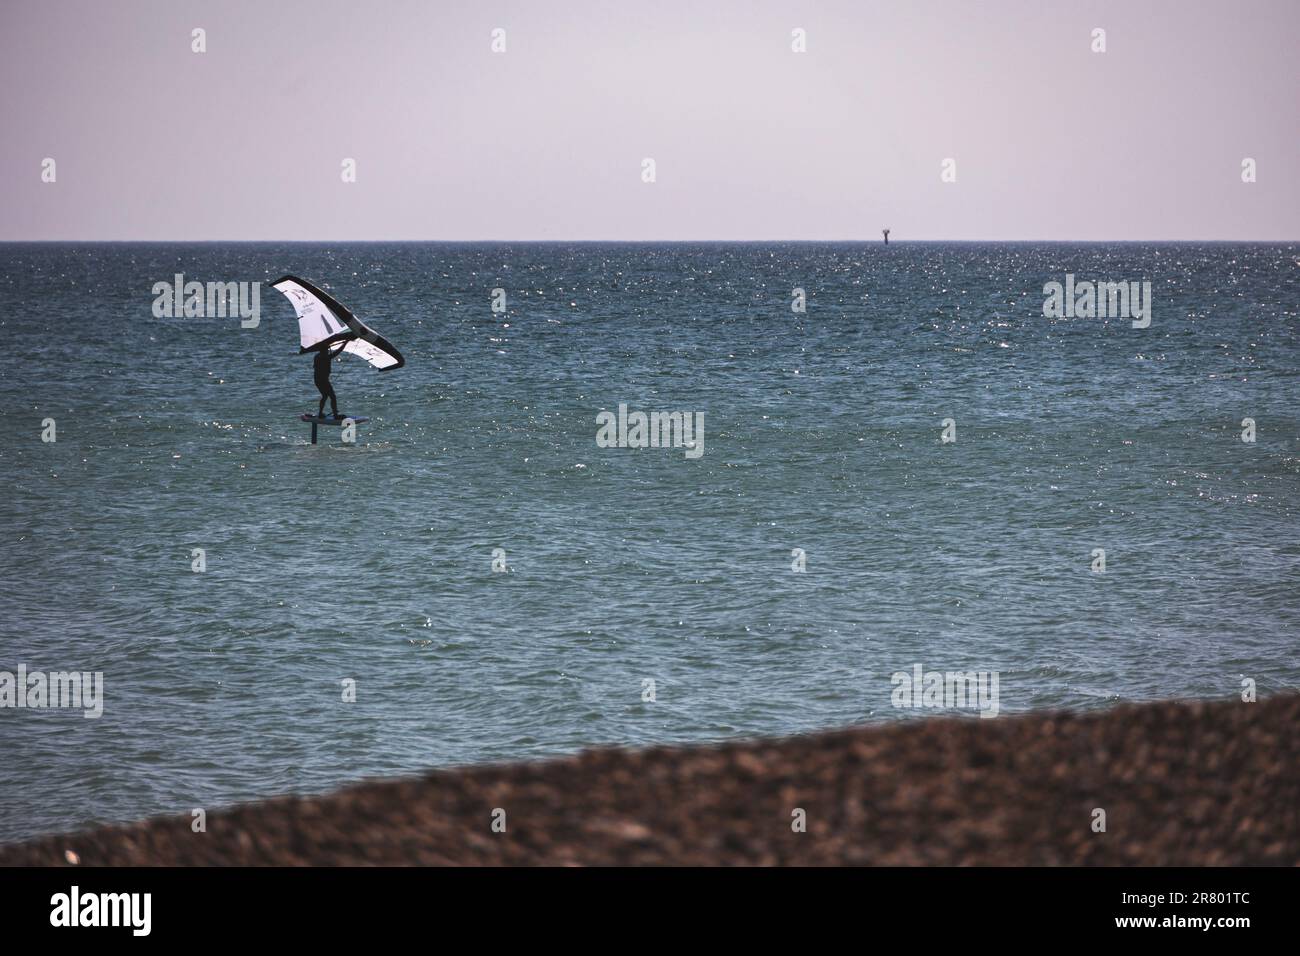 Wing surfer off the coast at Worthing, West Sussex, UK Stock Photo